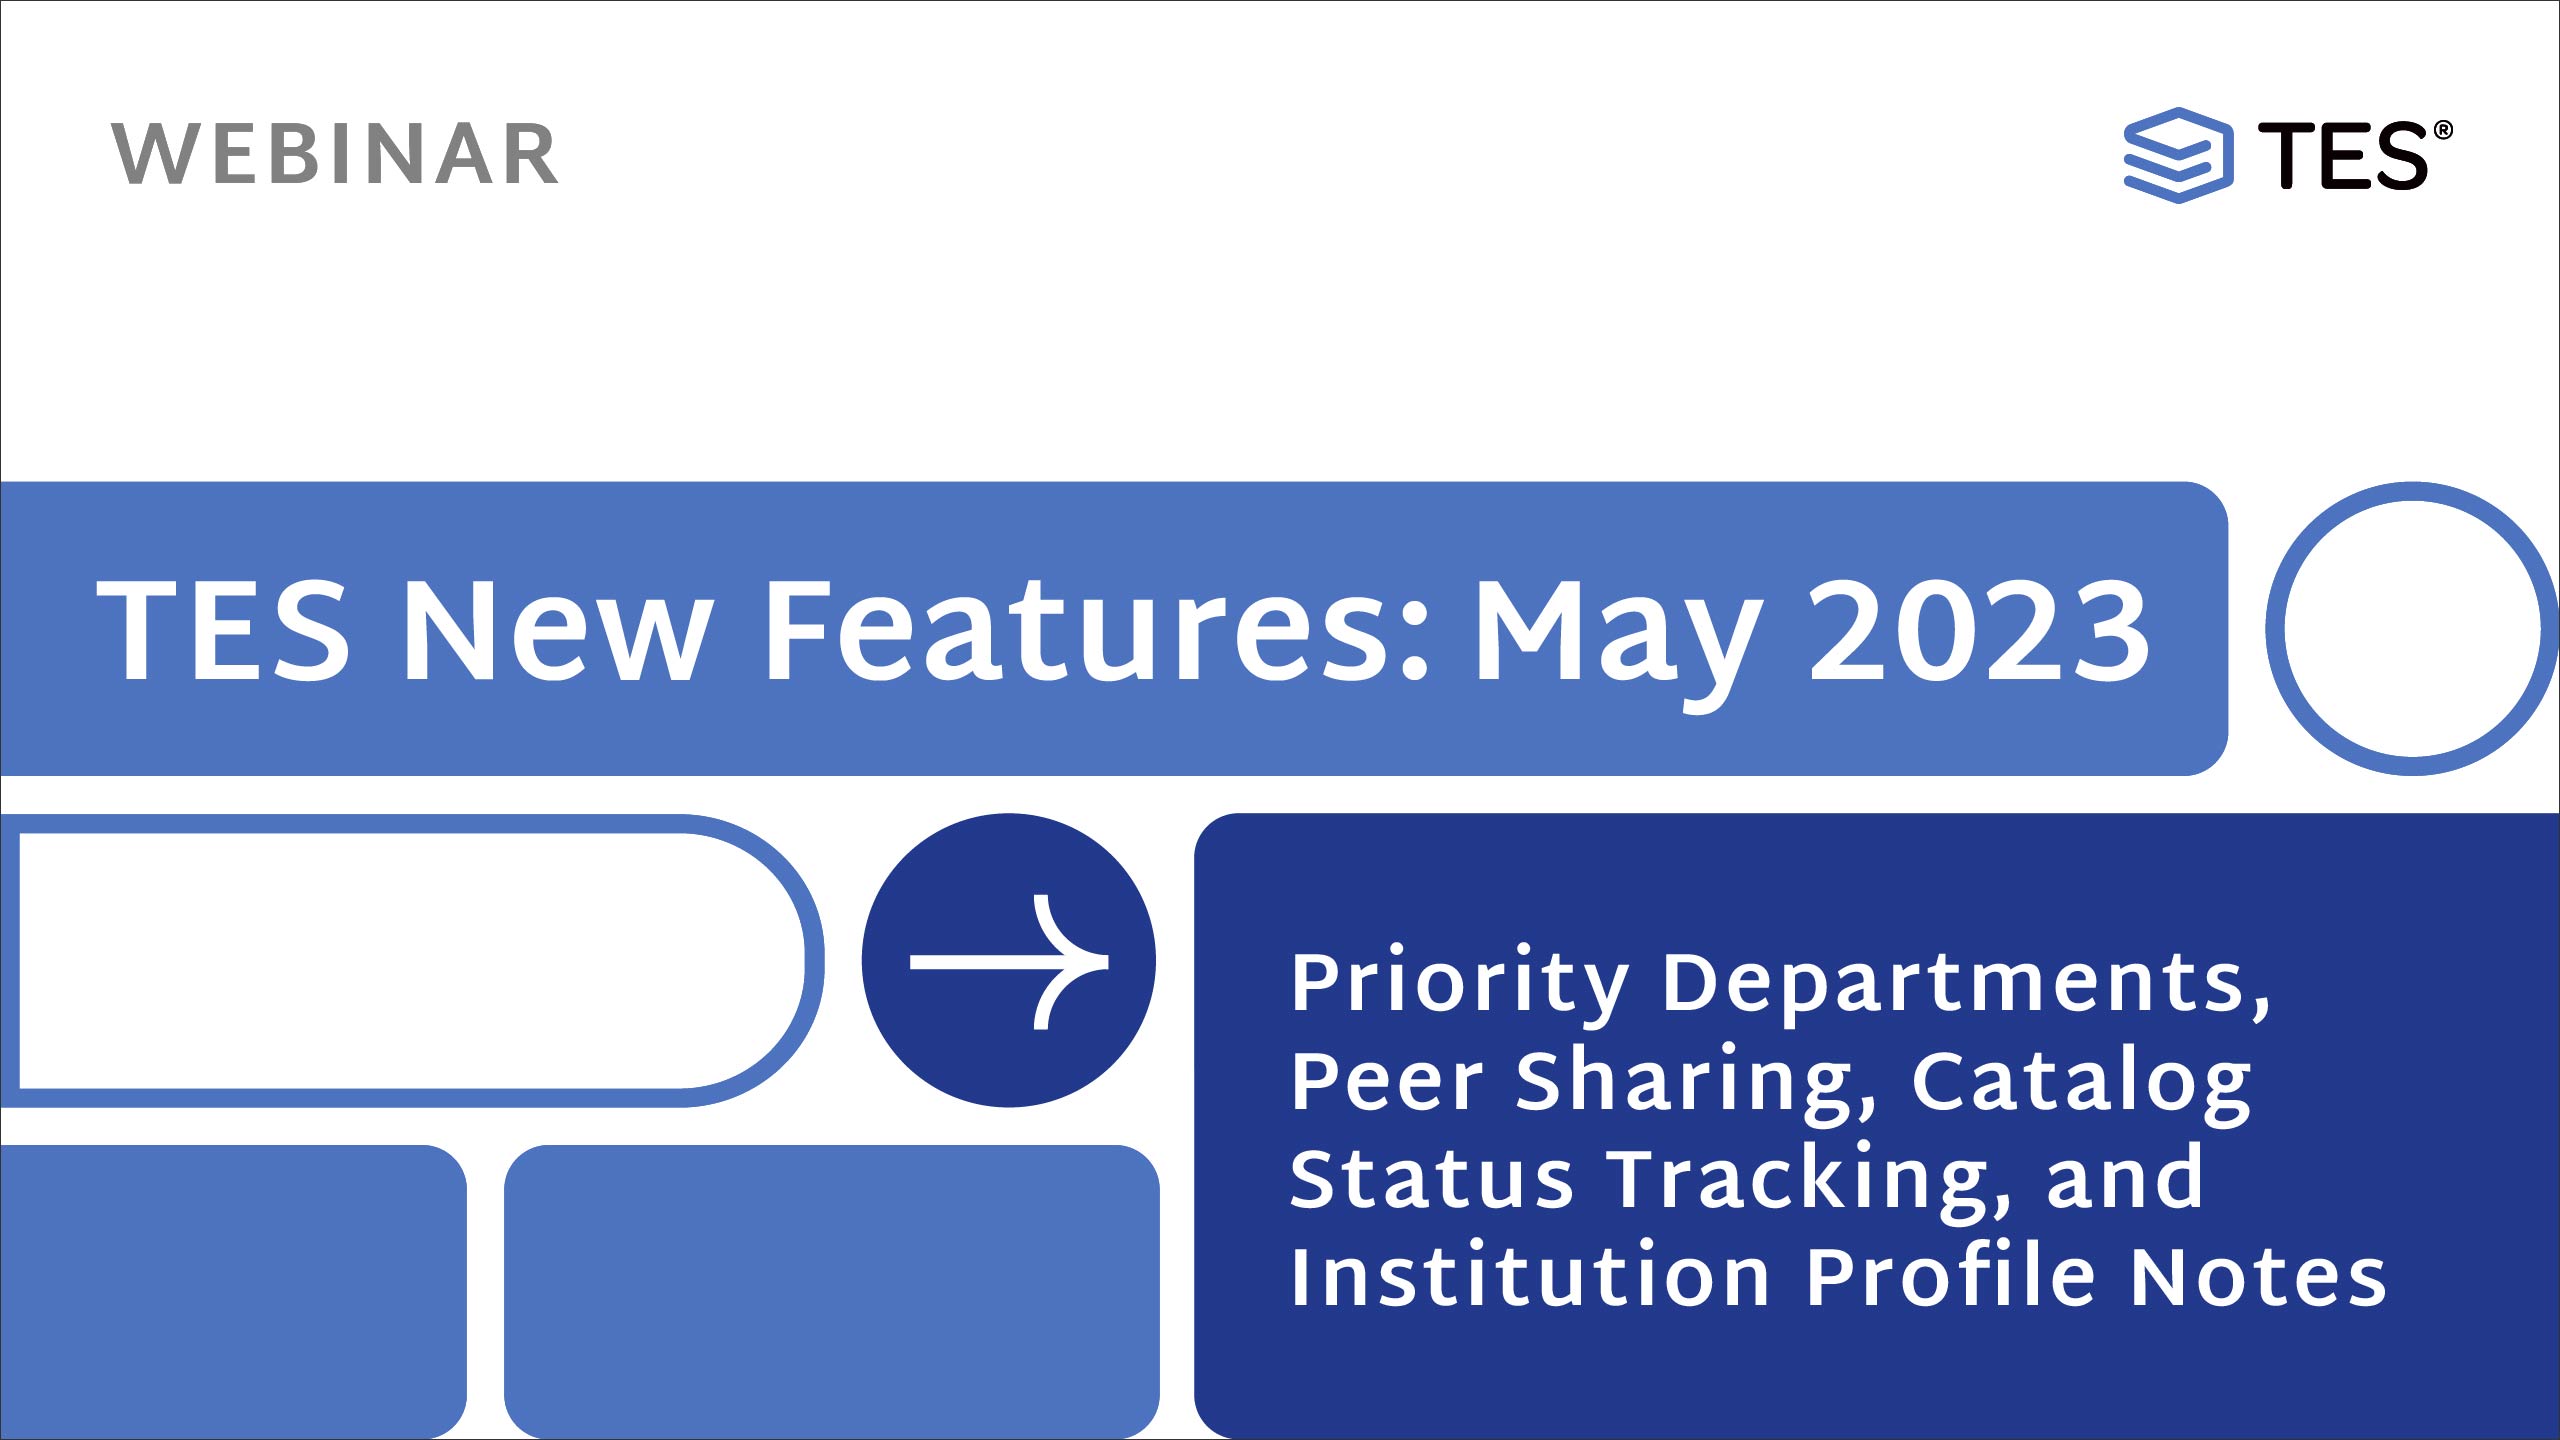 TES New Features Webinar Peer Sharing and More May 2023